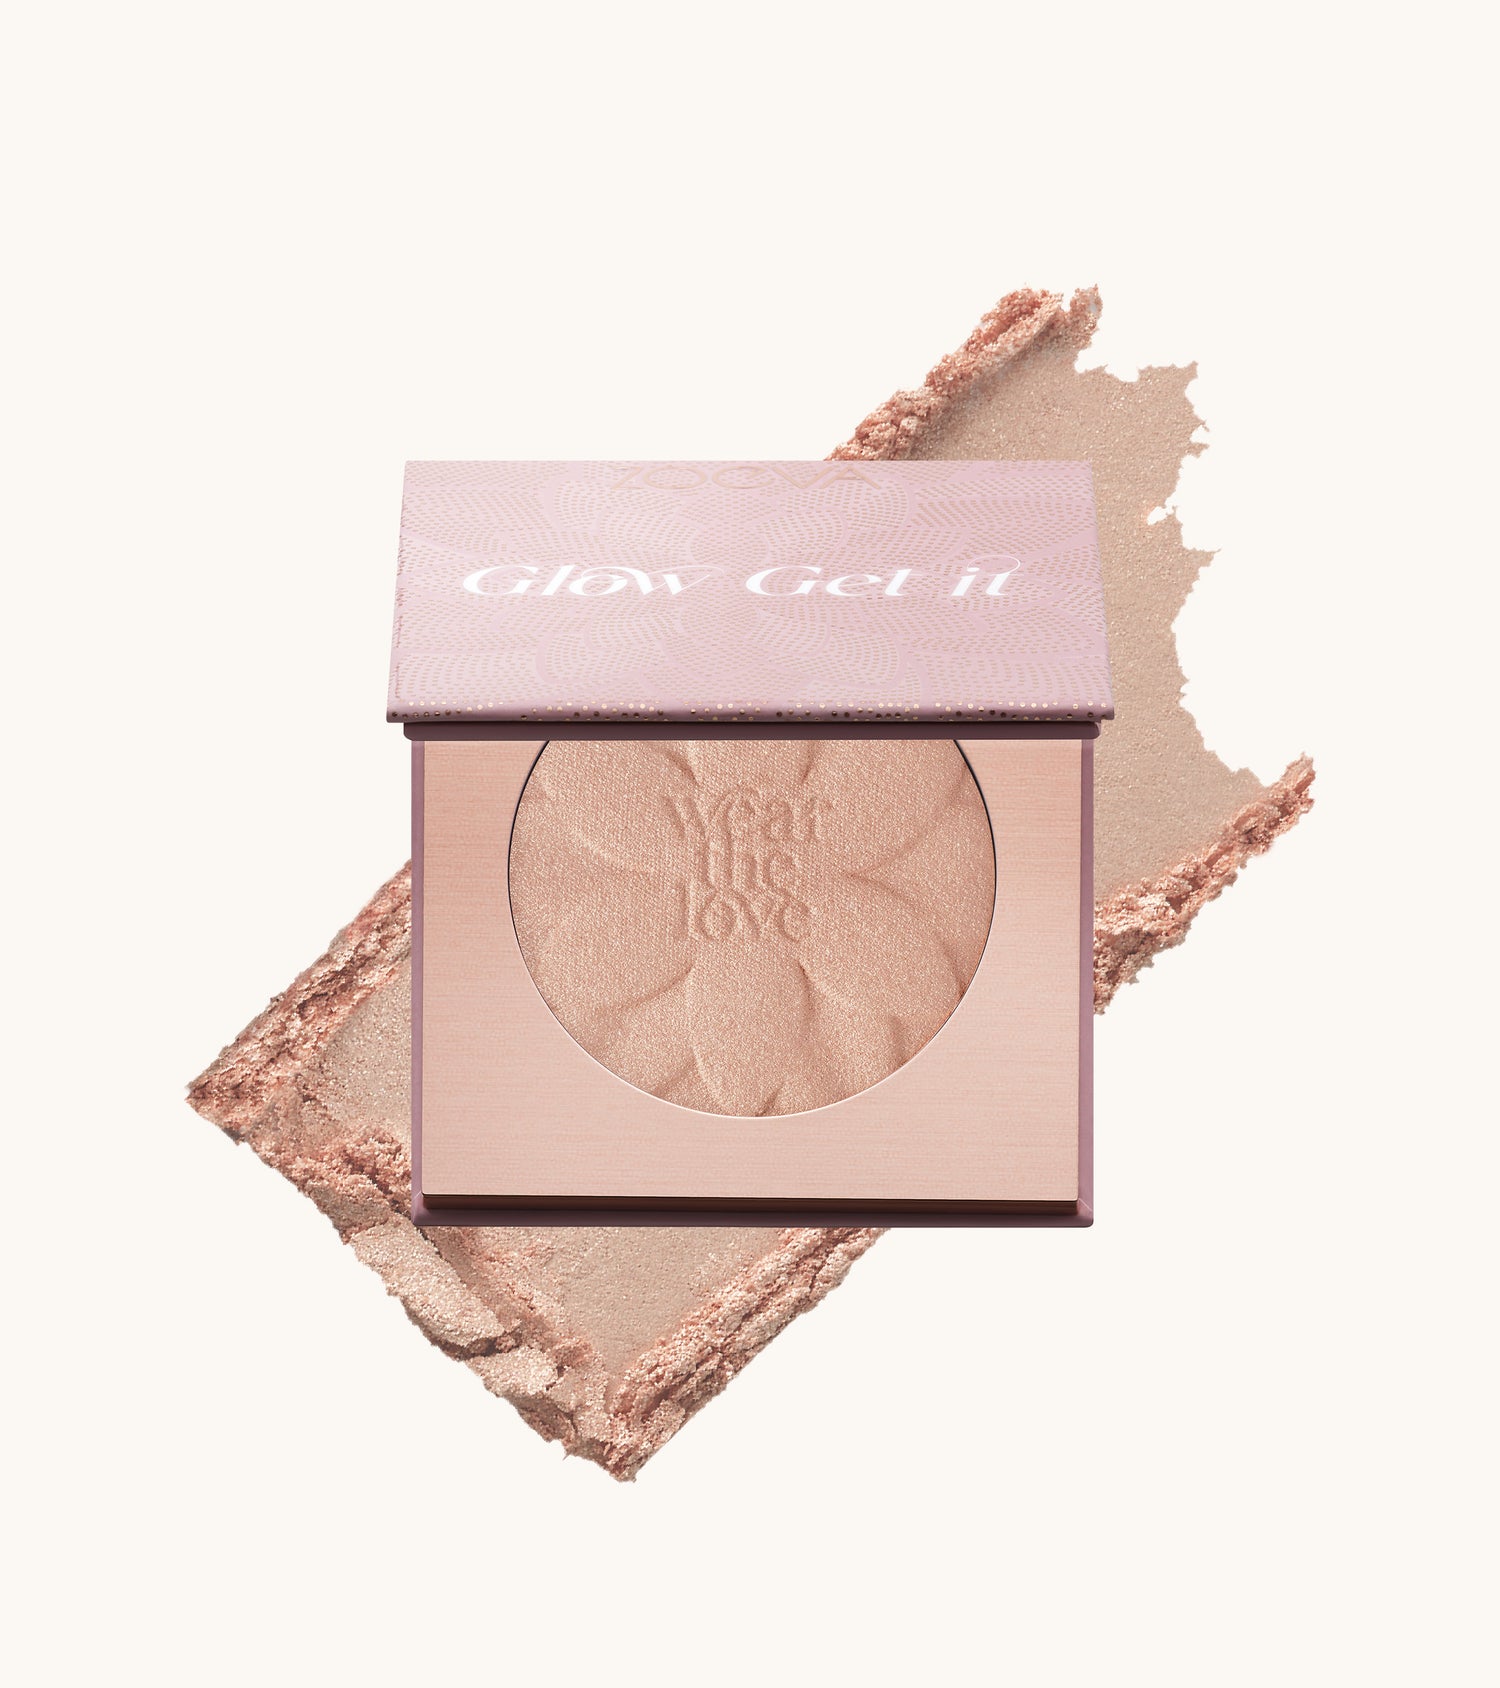 Glow Get It Highlighting Powder (Dreamy Rose Golden) Main Image featured